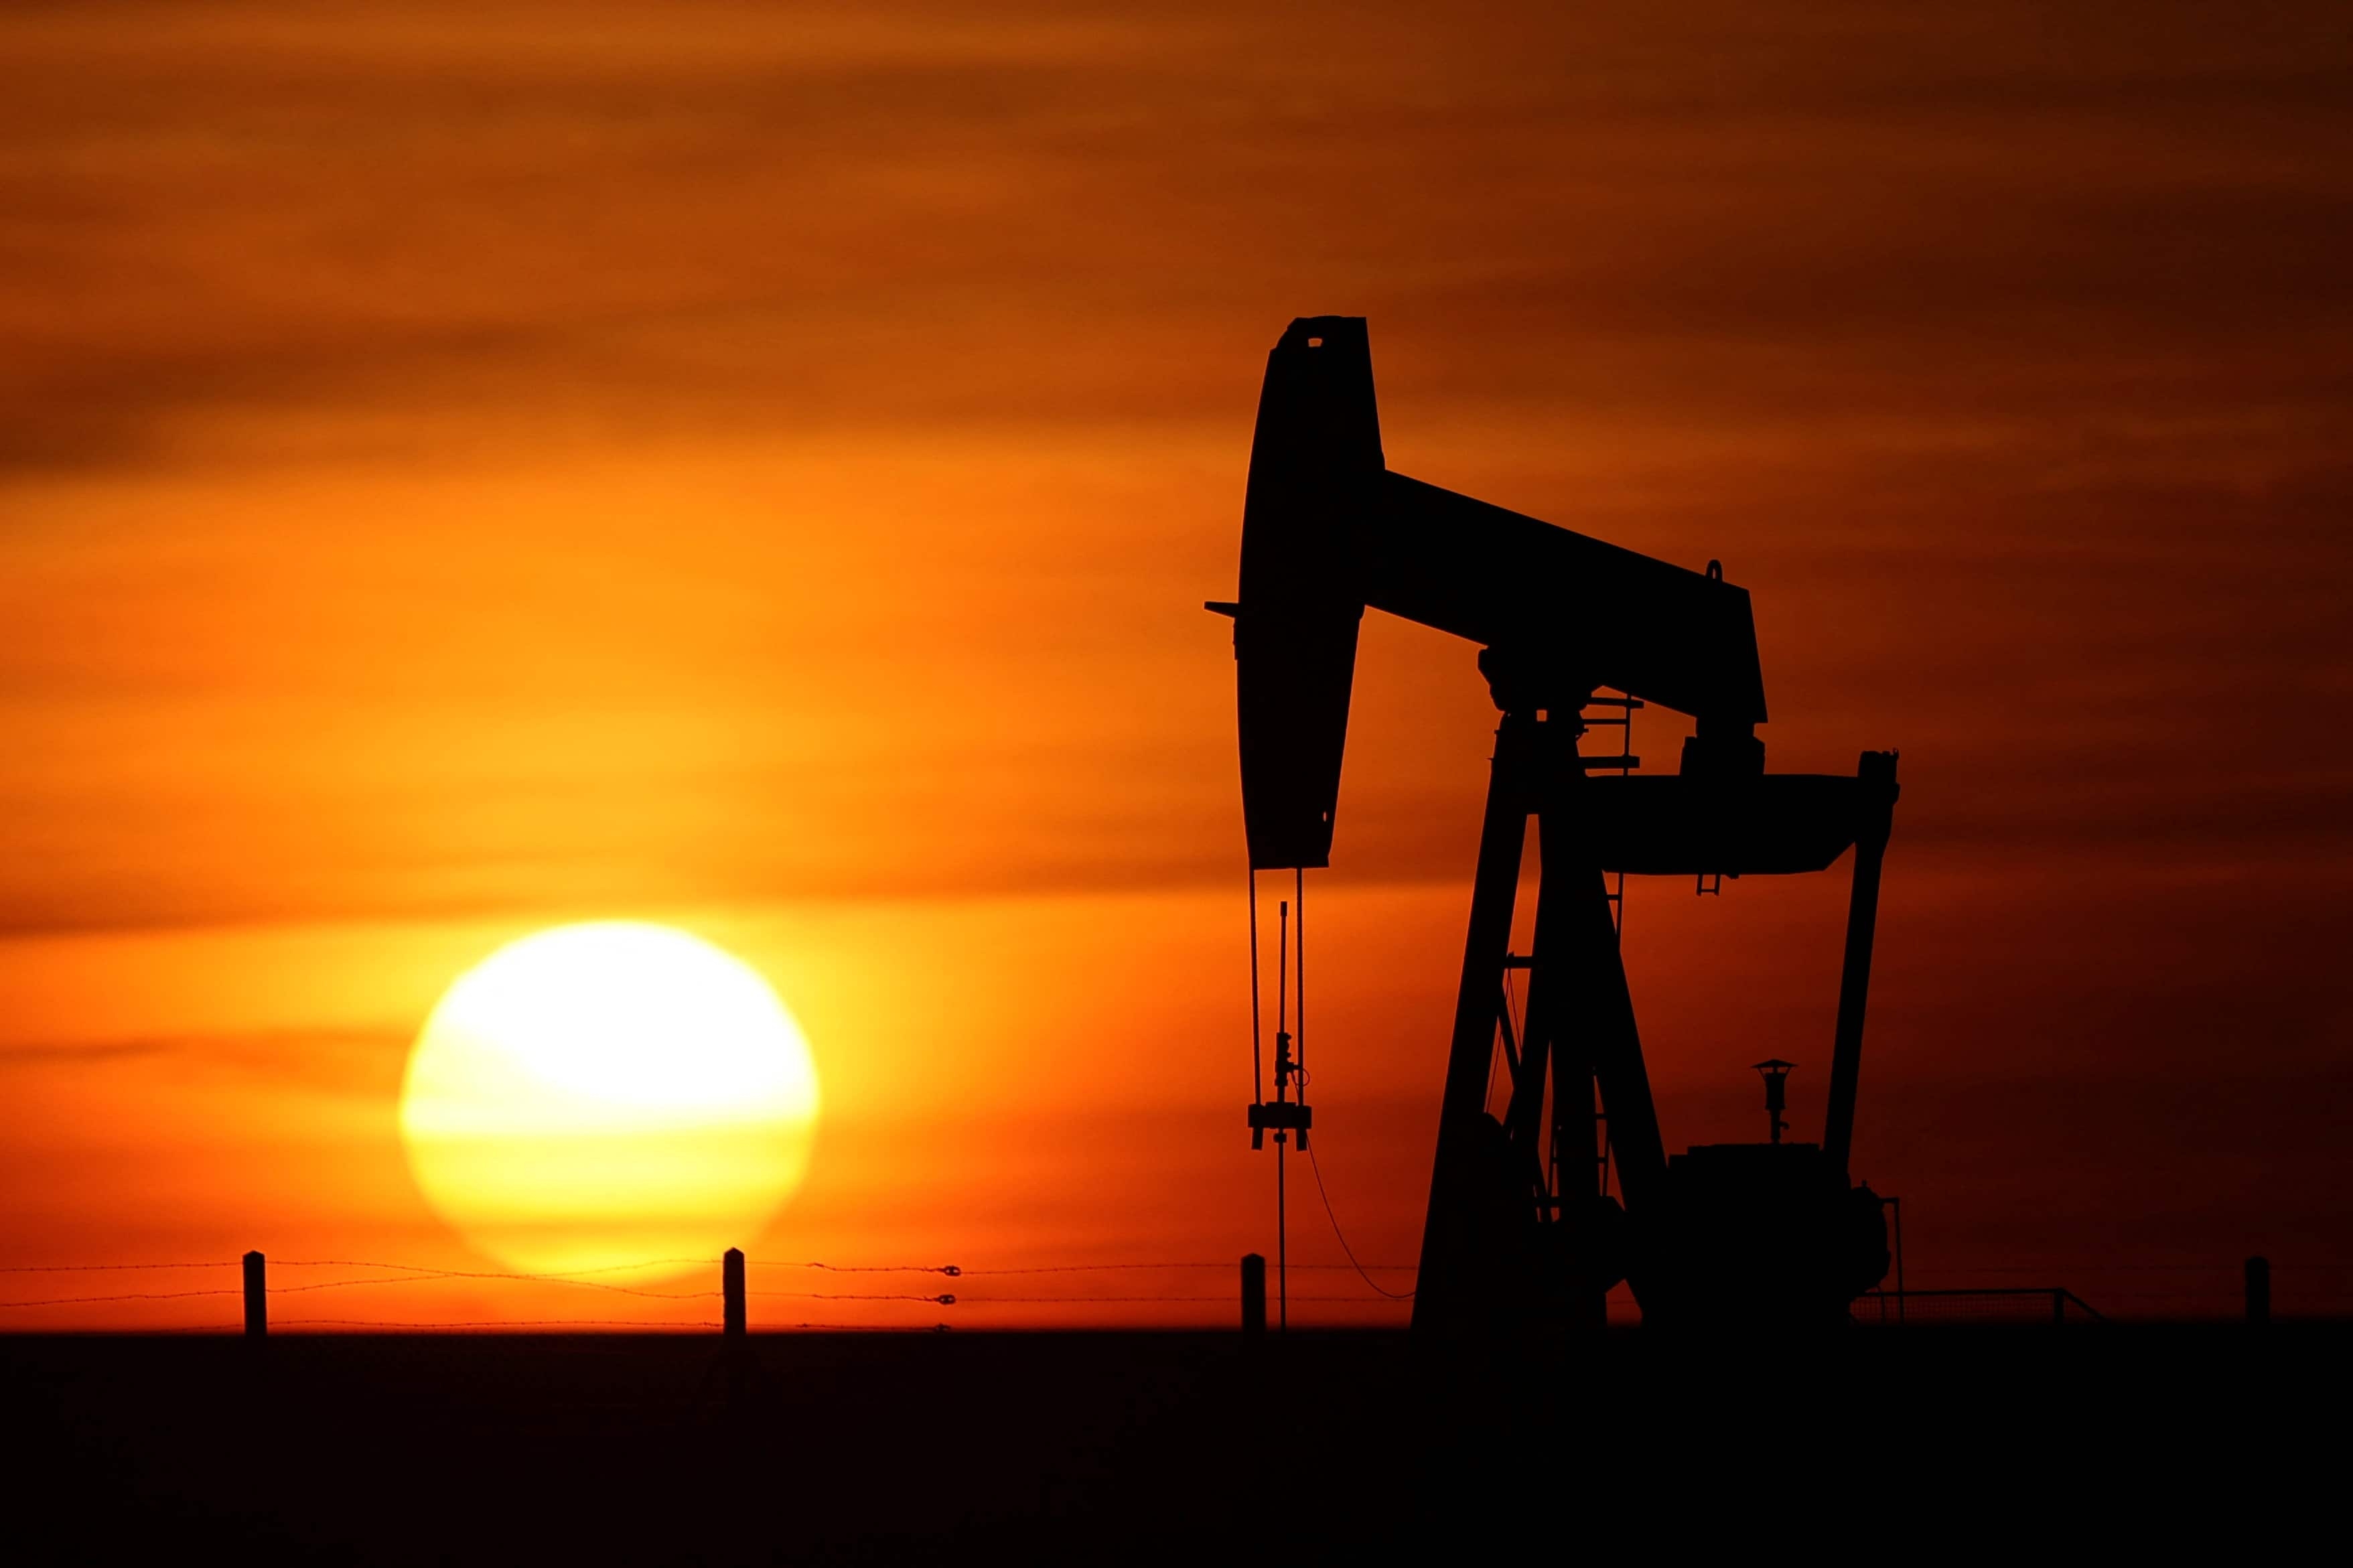 Oil surged for a fourth day, heading for the best run in a month, on signs the European Union may be edging closer to a ban on Russian crude imports to punish Moscow for its invasion of Ukraine. Front-month West Texas Intermediate futures were up 1.97 percent to $114.33 a barrel and Brent futures were up 2.26 percent to $118.23 a barrel.